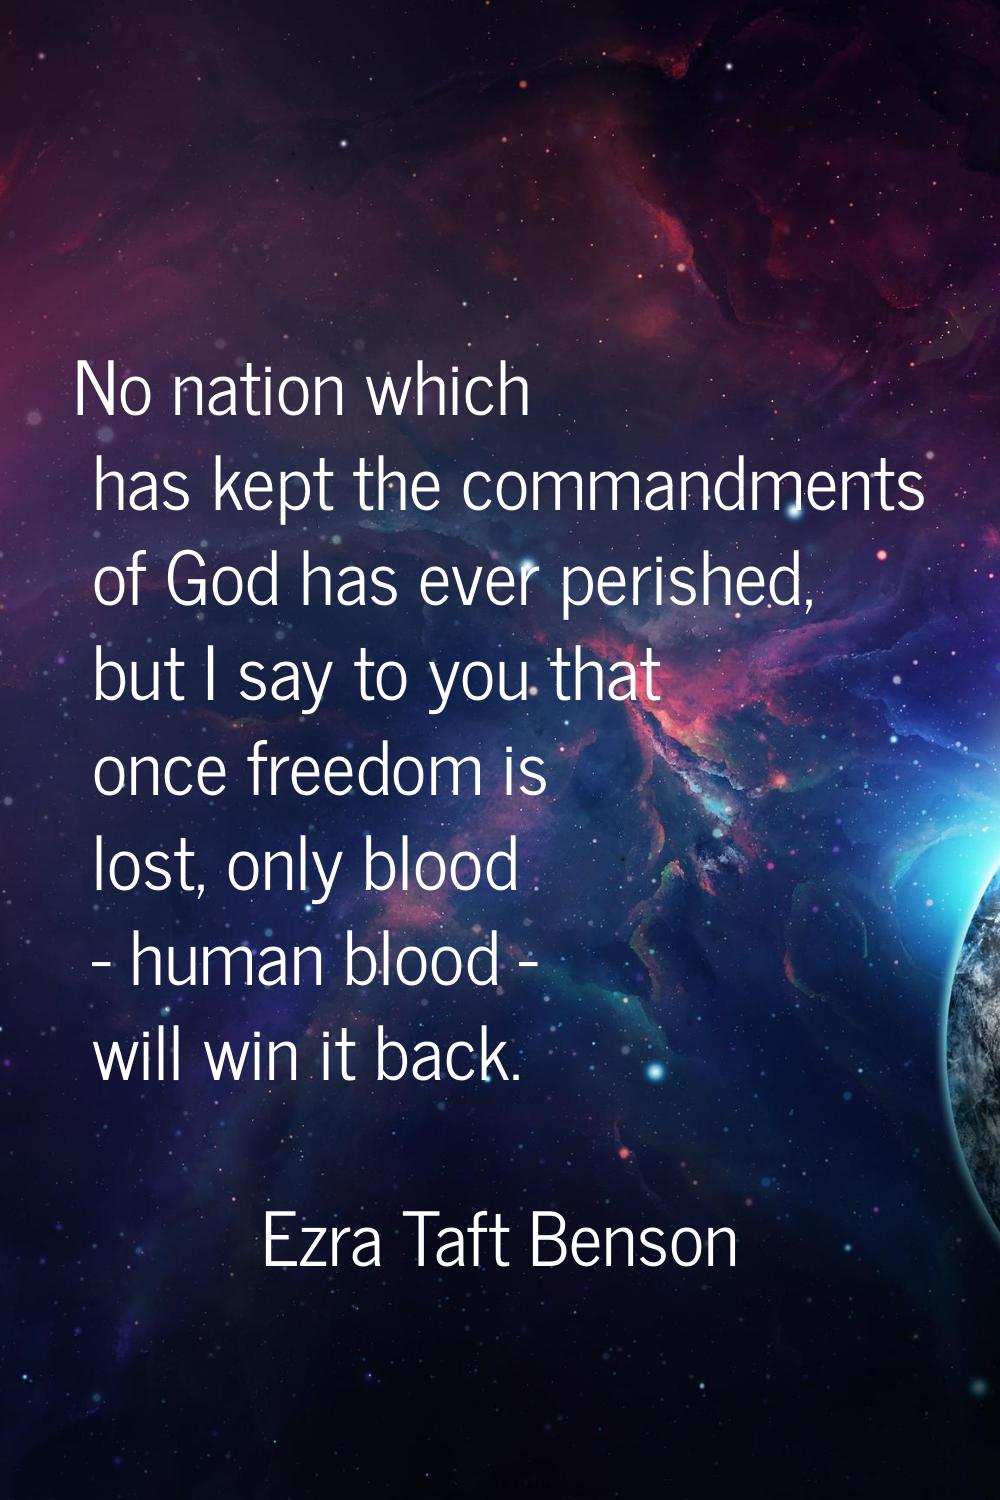 No nation which has kept the commandments of God has ever perished, but I say to you that once free